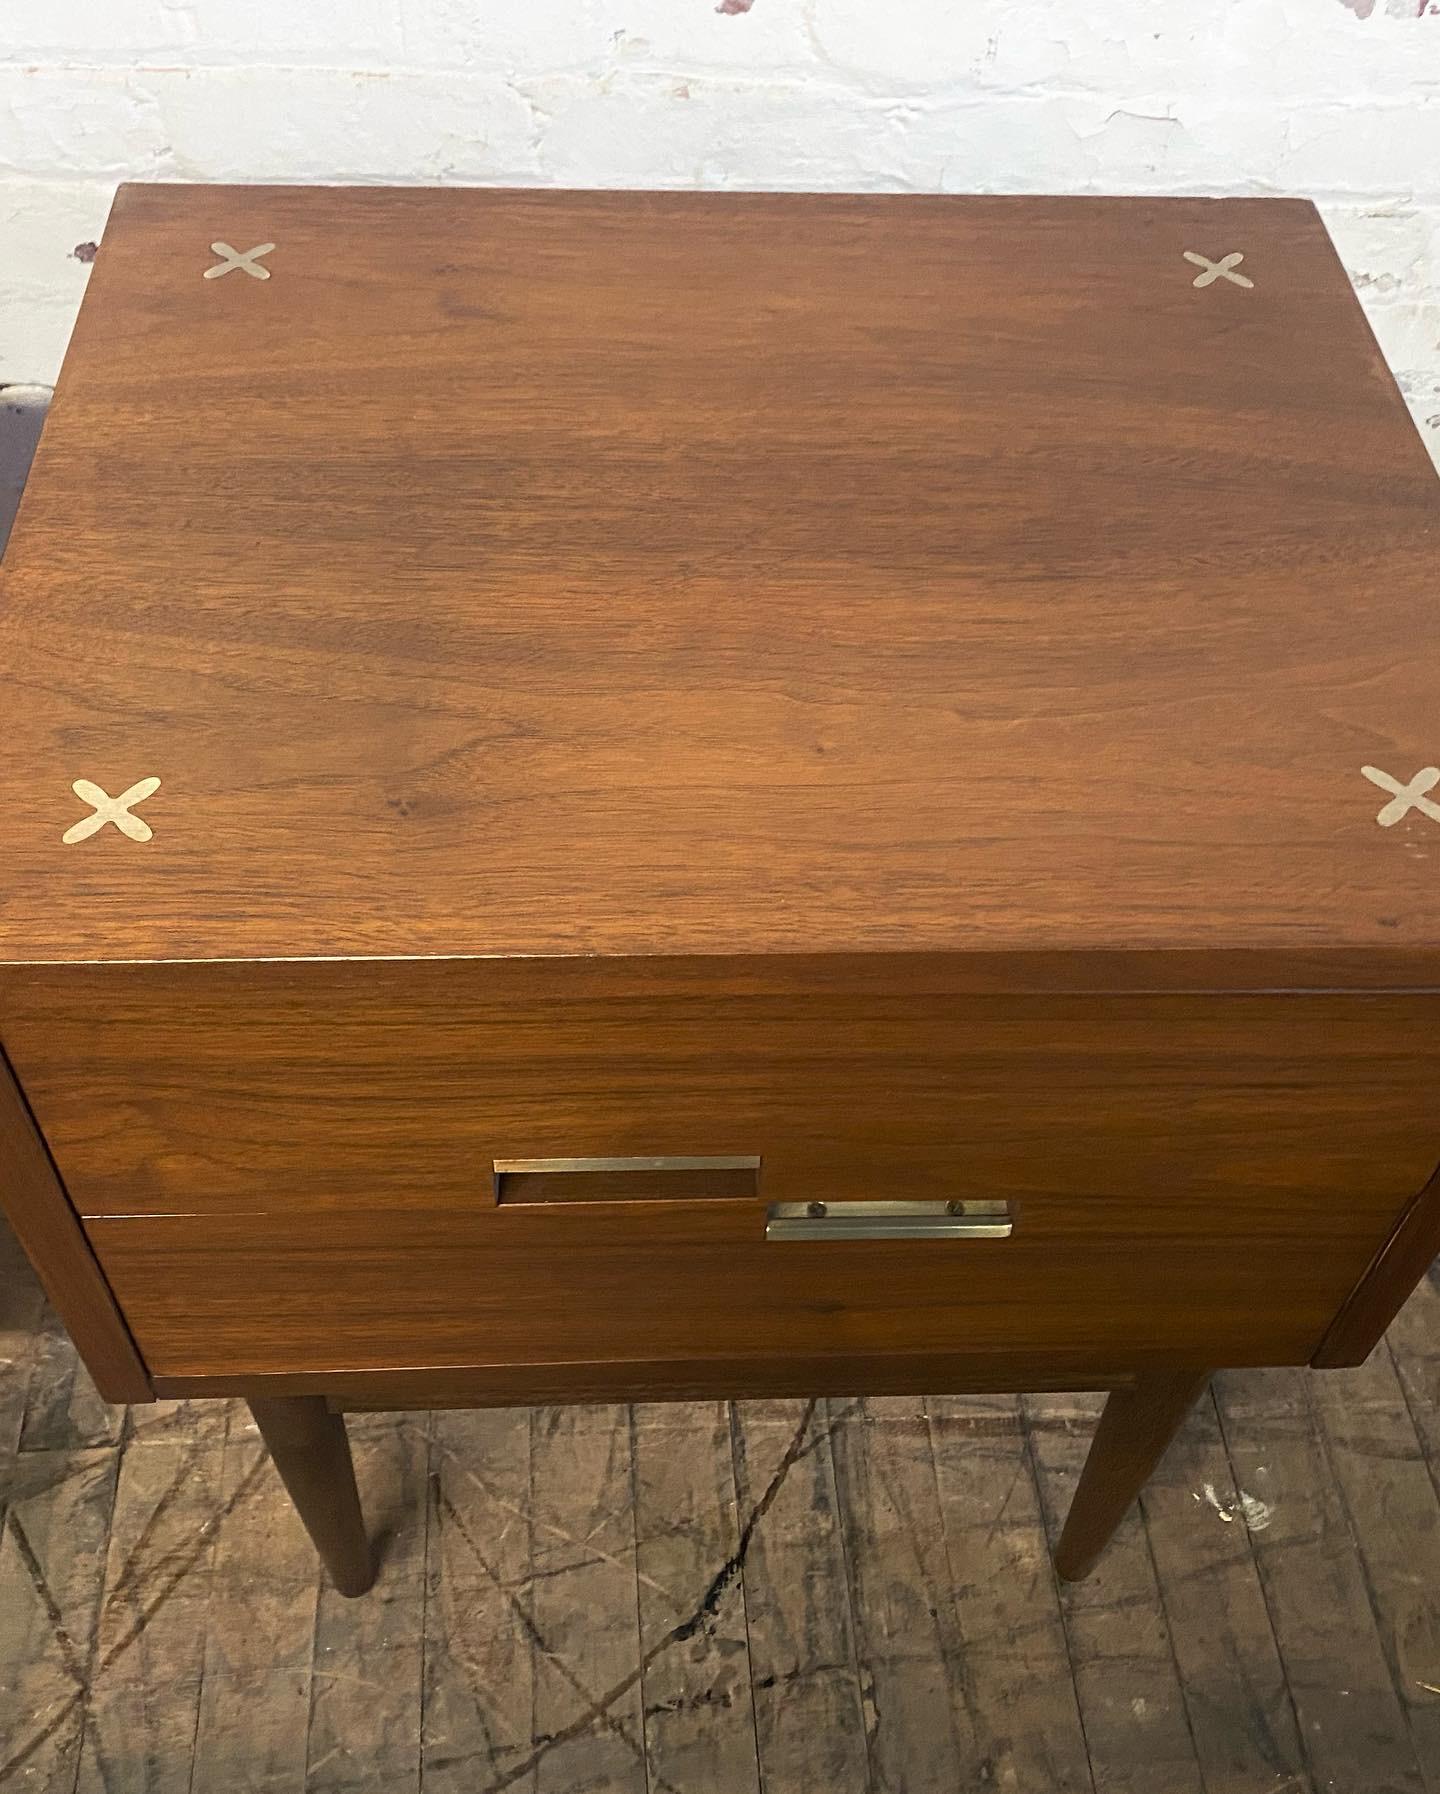 Handsome nightstands or end tables from American of Martinsville and Merton Gershun’s Accord line of furniture with their signature X’s and asymmetric handles, nice original condition, patina.